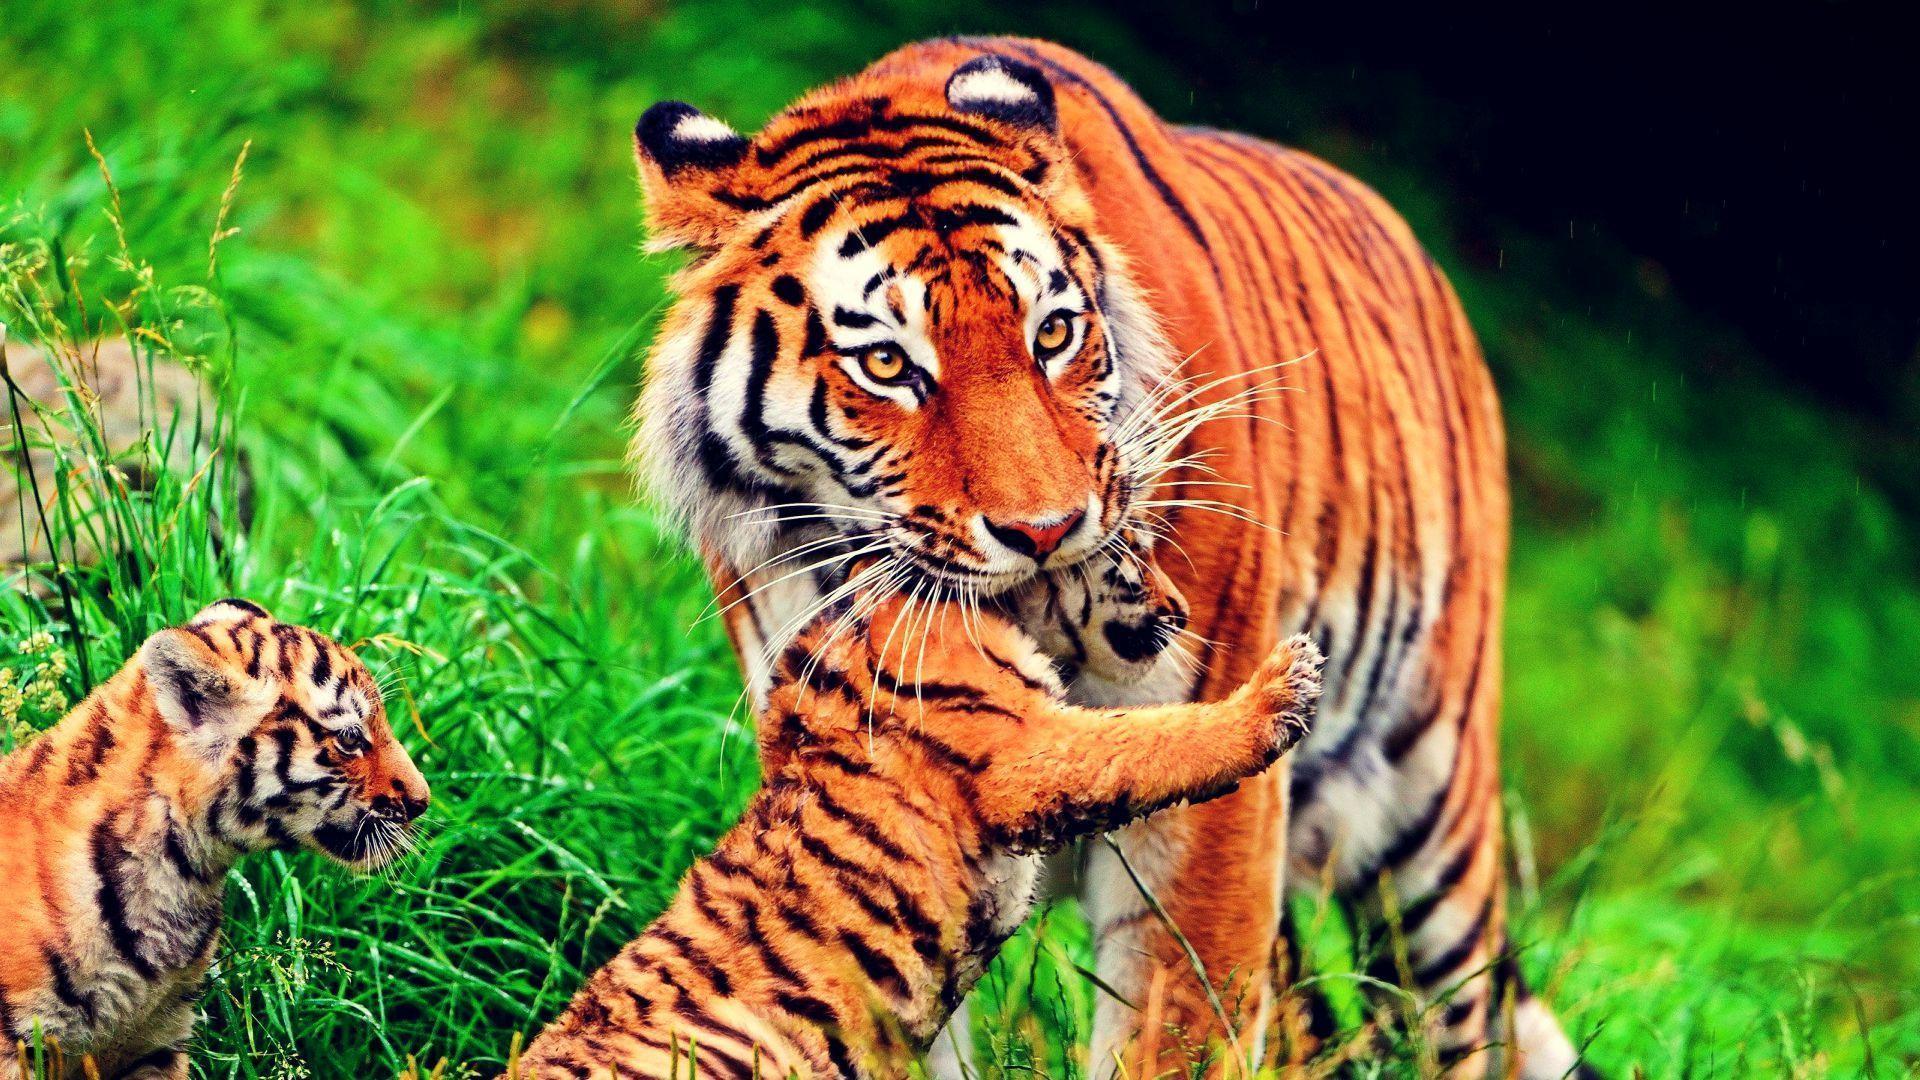 Wallpapers Hd Tiger Hd Backgrounds Wallpapers 31 HD Wallpapers